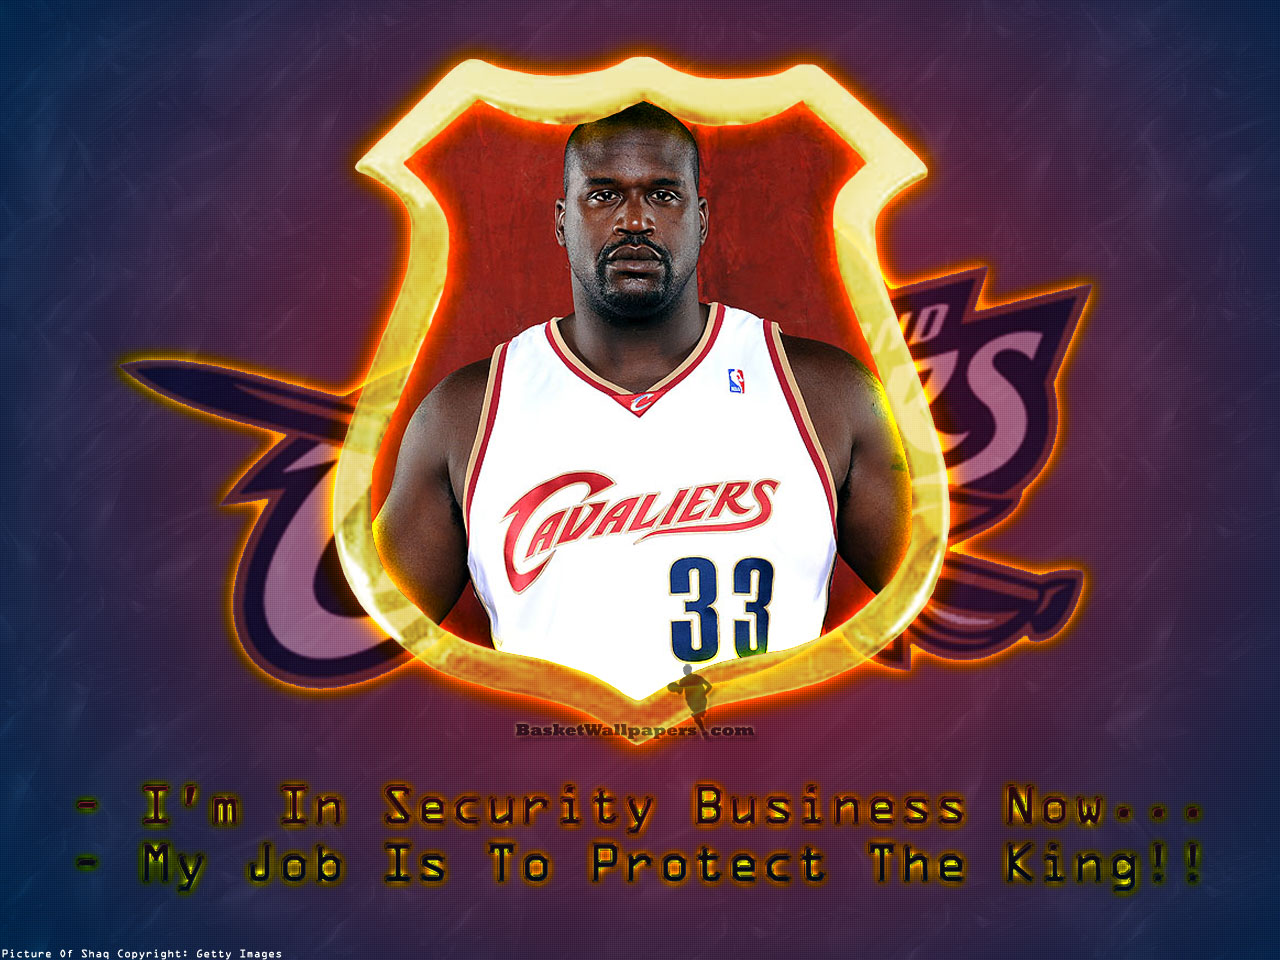 Shaquille O Neal Cavaliers Wallpaper Basketball